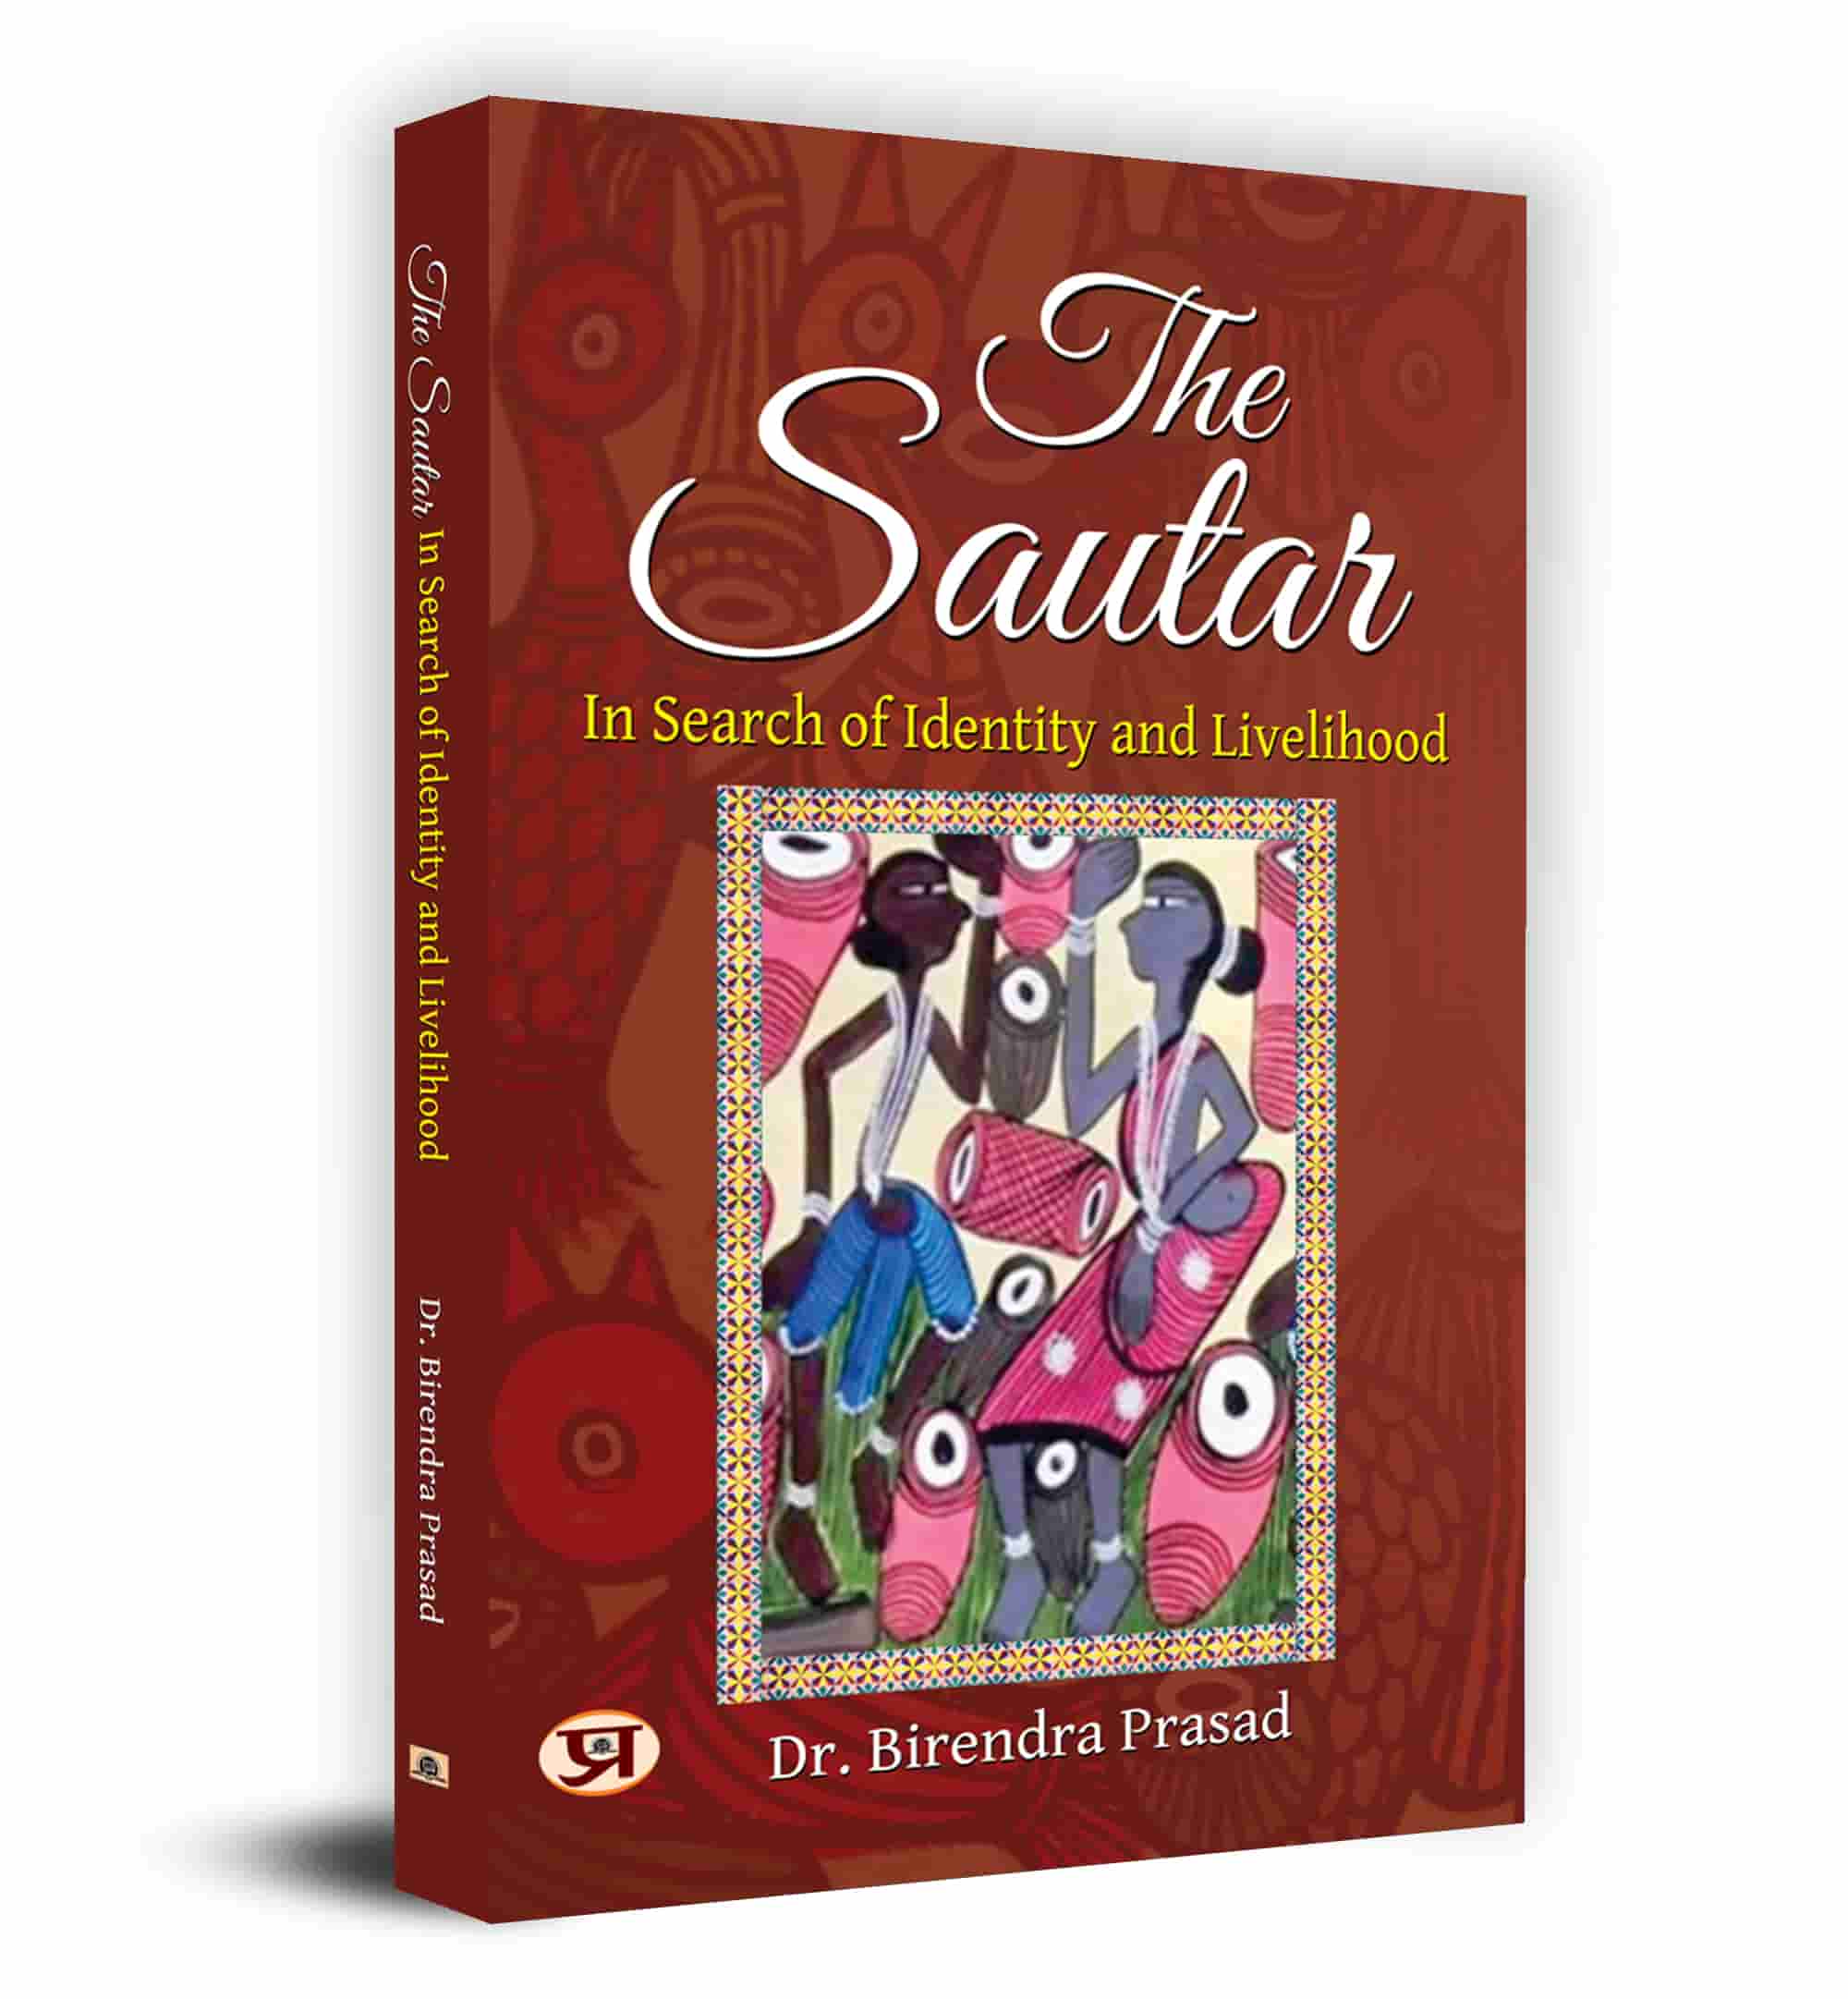 The Sautar: In Search of Identity and Livelihood by Dr. Birendra Prasad (Book in English)